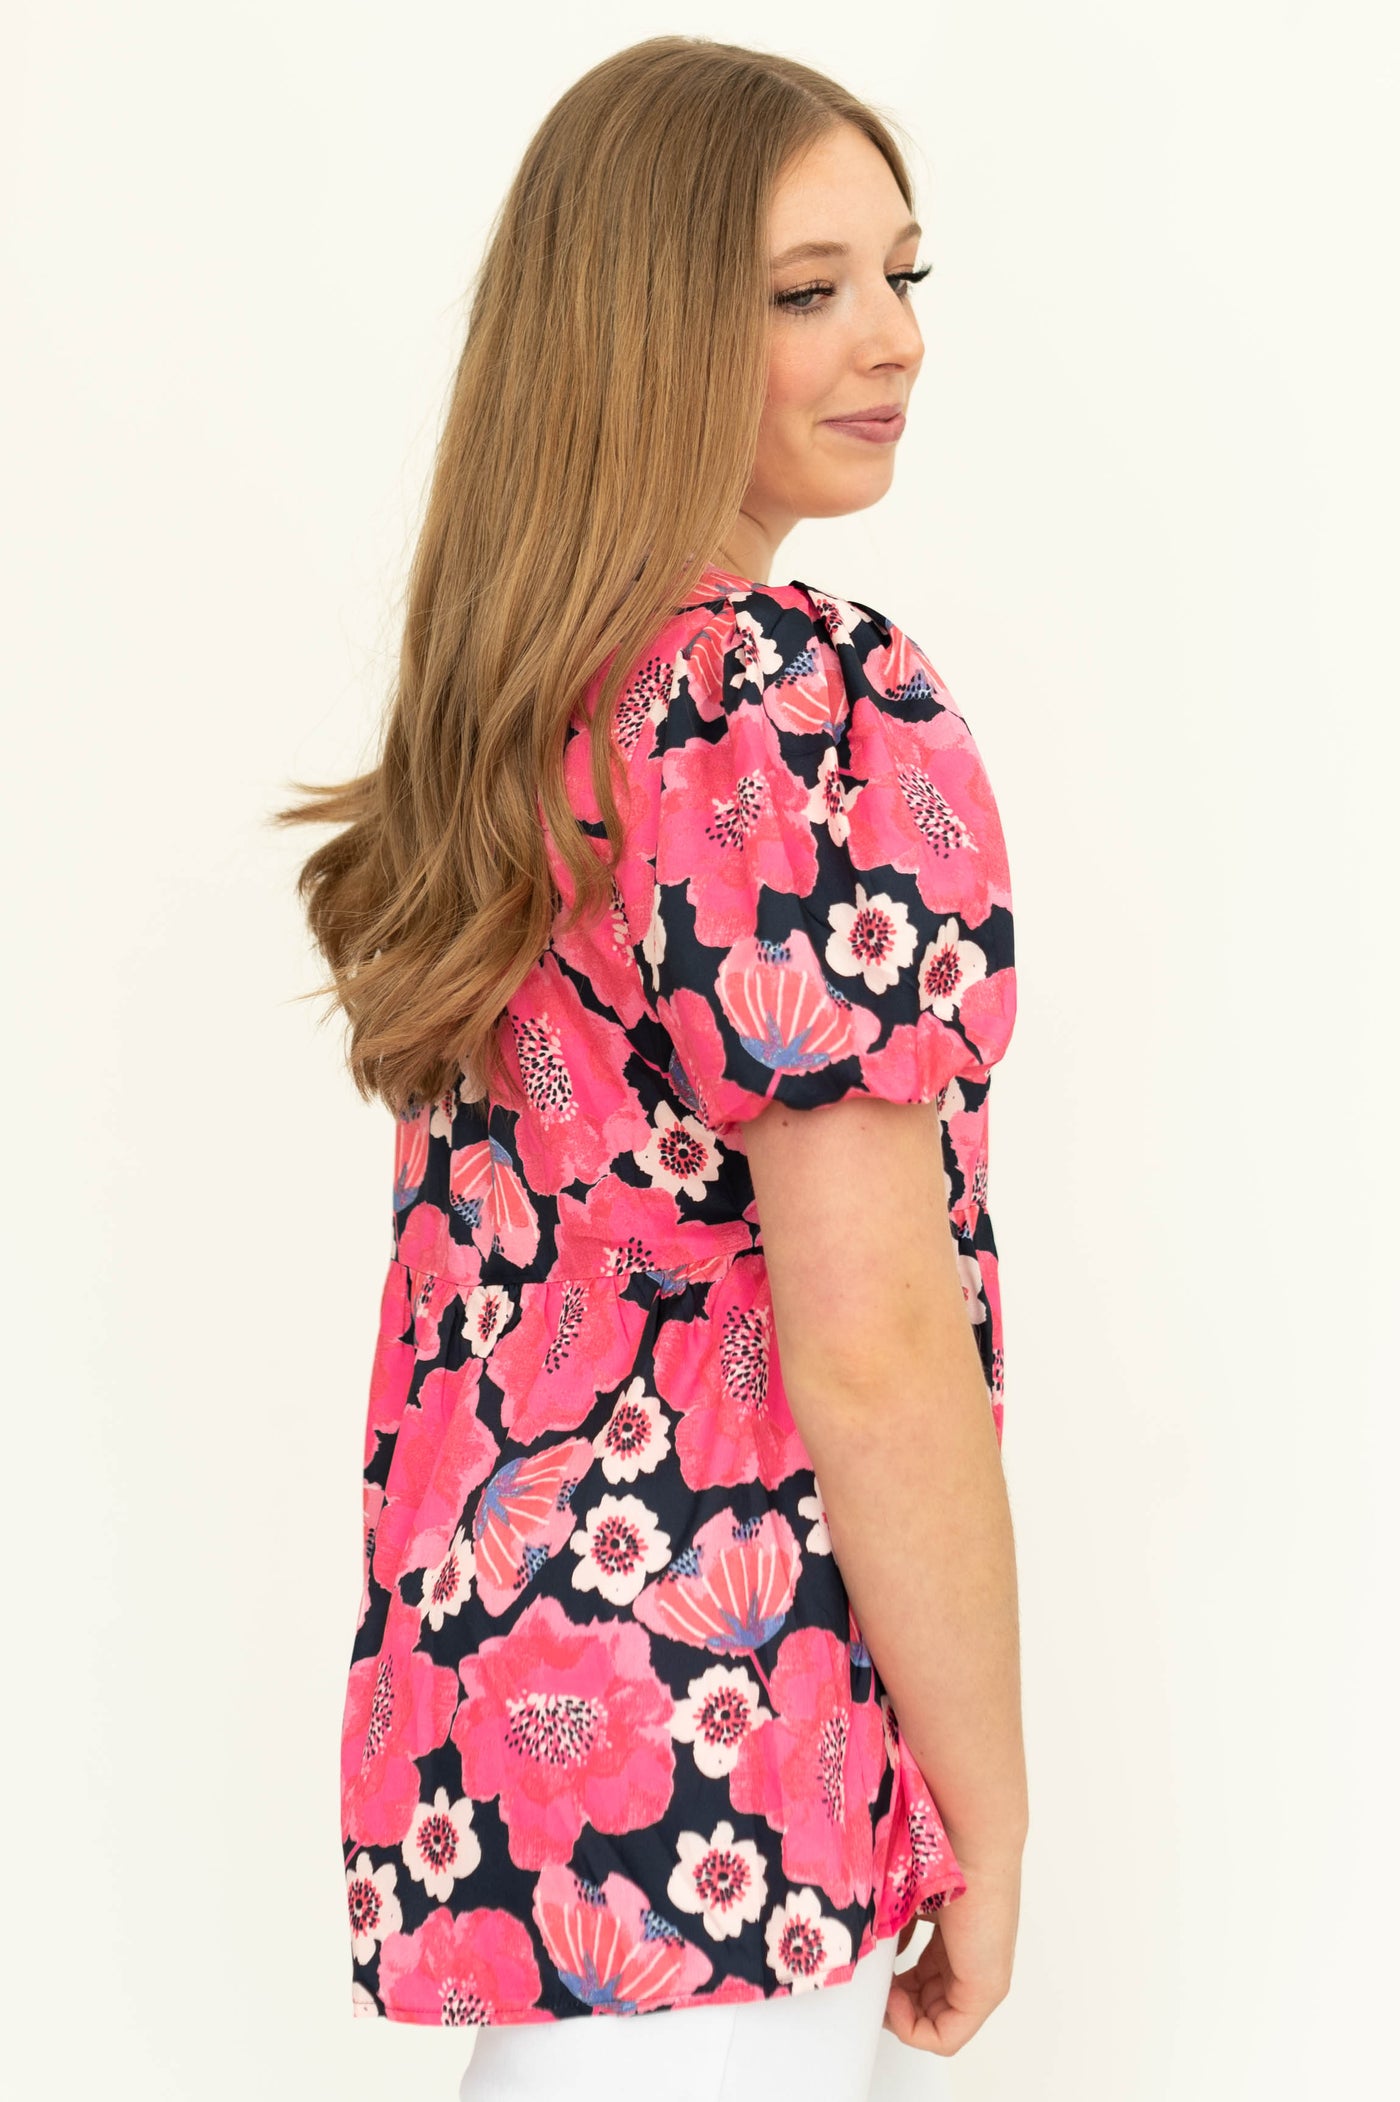 Sife view of a short sleeve deep pink floral top.